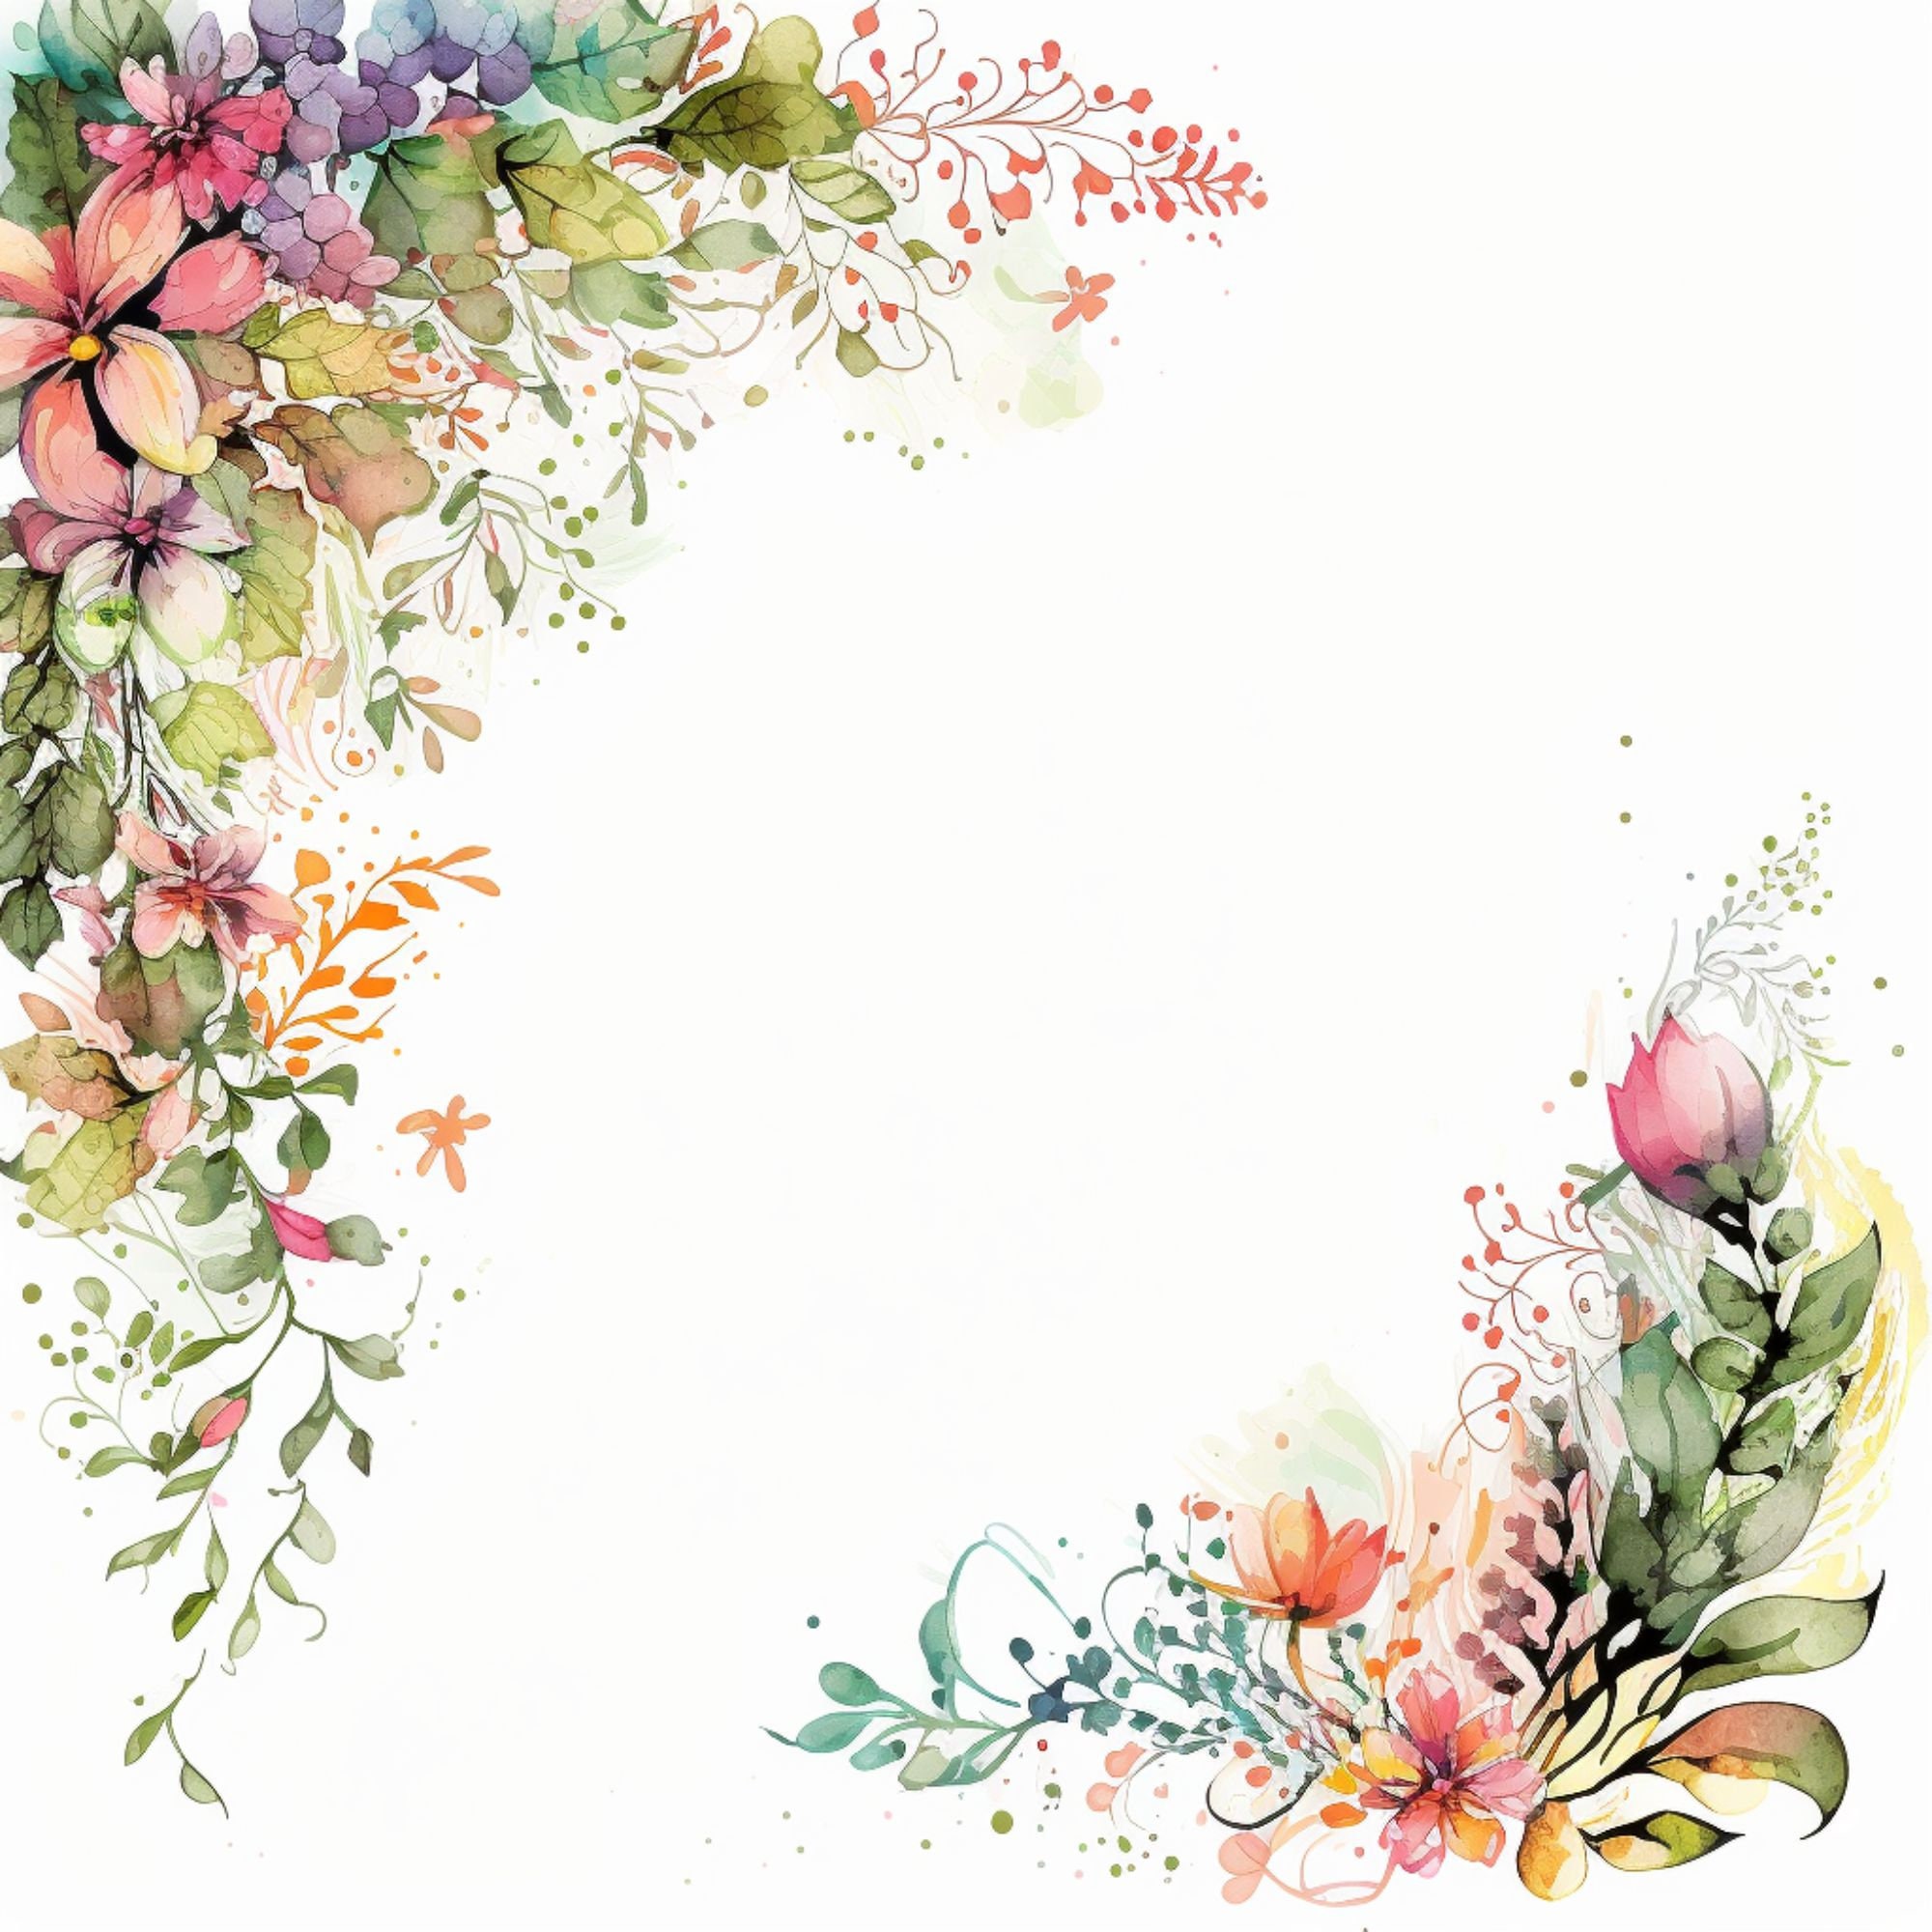 Watercolor Flower Border: Digital Download for Scrapbooking, Cards, and ...